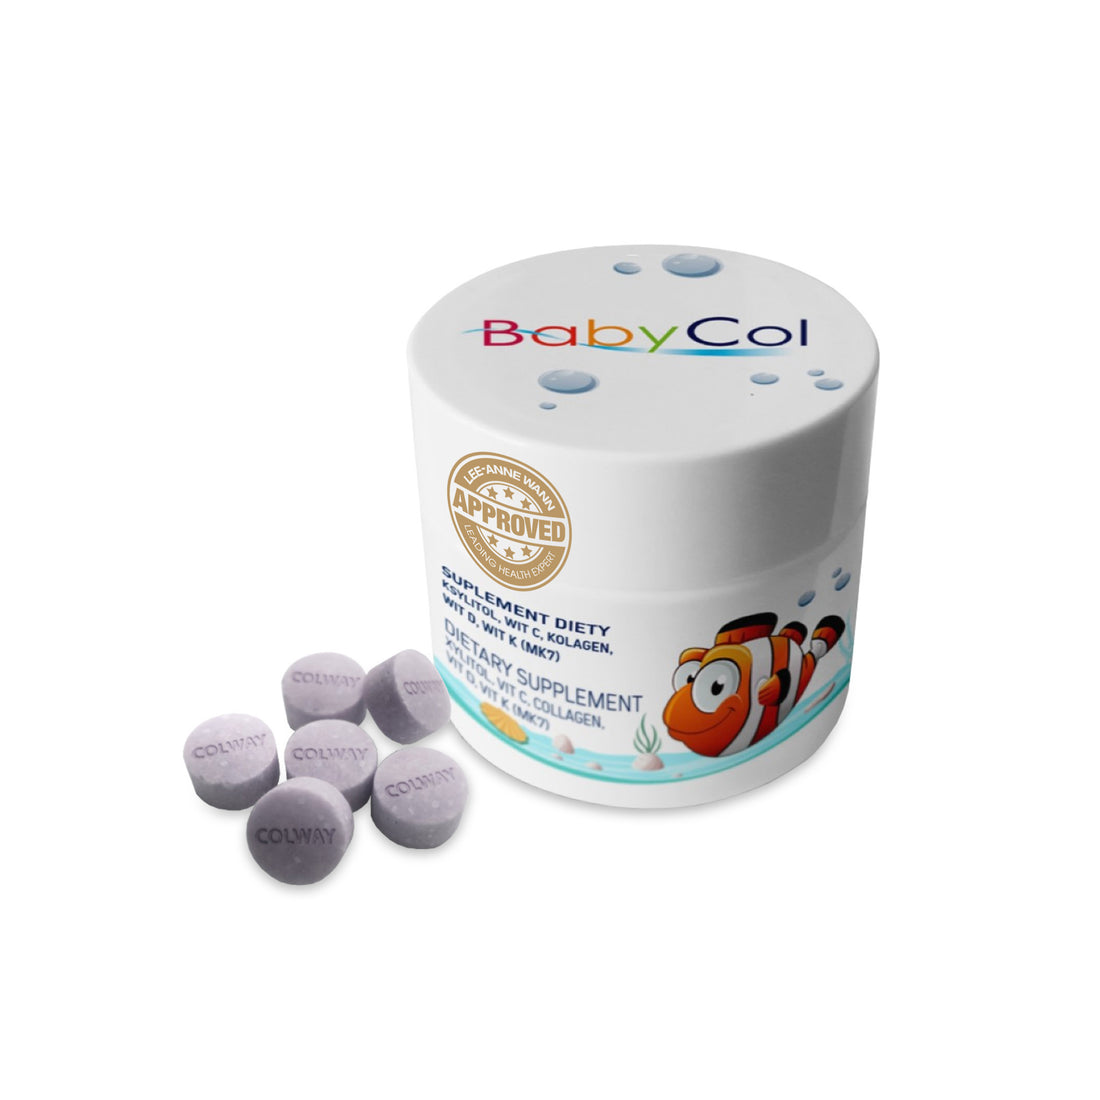 BabyCol - A unique formula designed to keep little people healthy